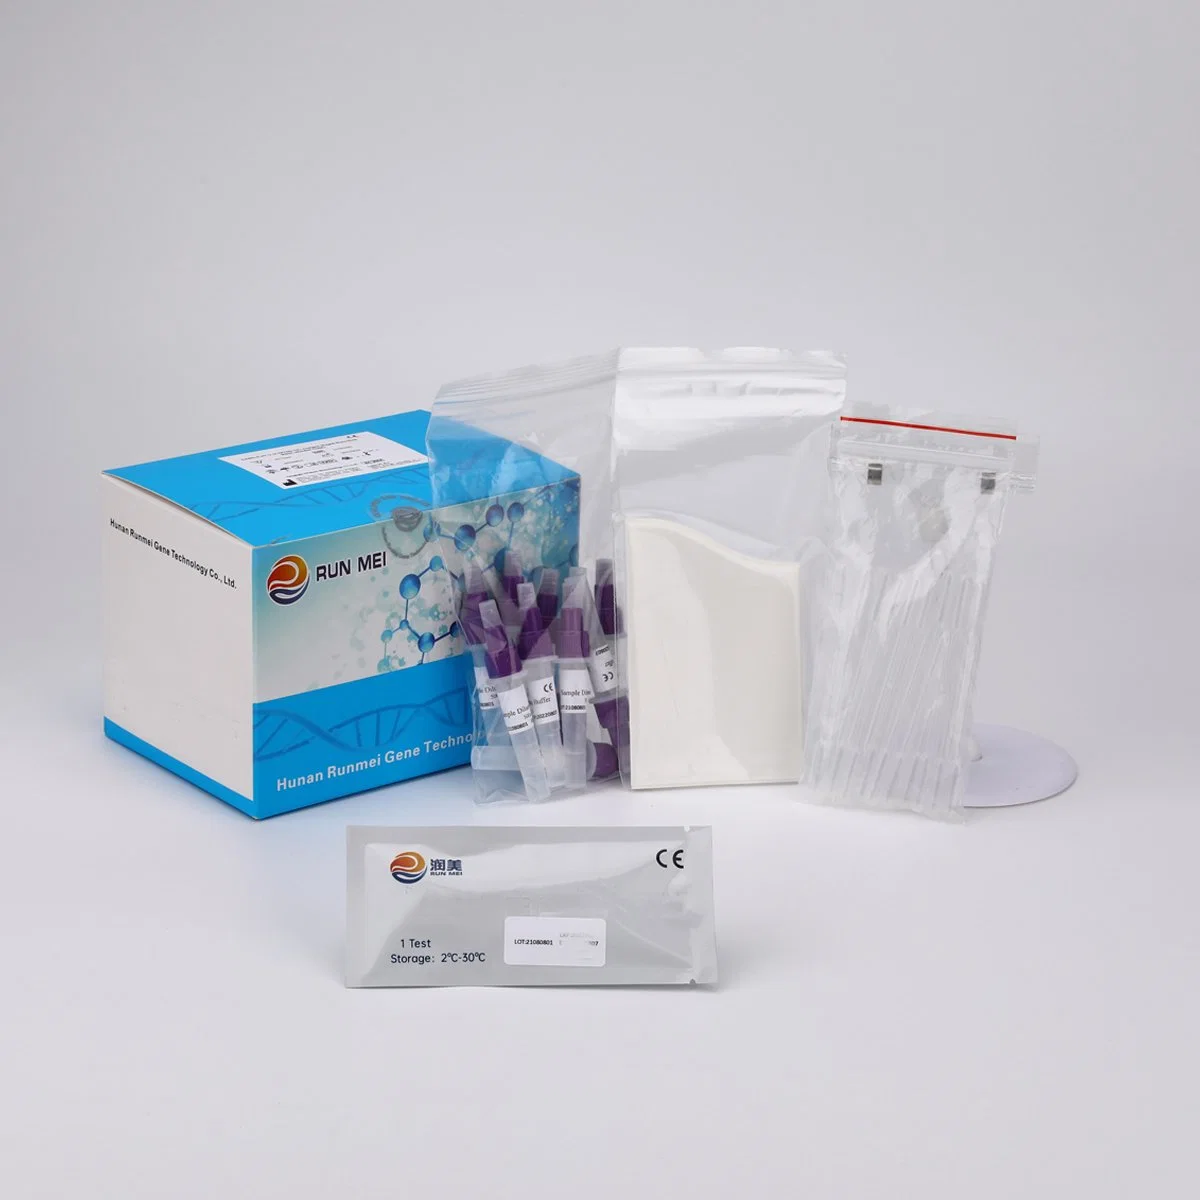 China Suppliers Runmei Antigen Rapid Diagnostic Kit with CE /ISO13485 Approve Antigen Rapid Test Kit Detection Kit Nasal/Oral/Saliva Test Swab Kit One Stop Solu